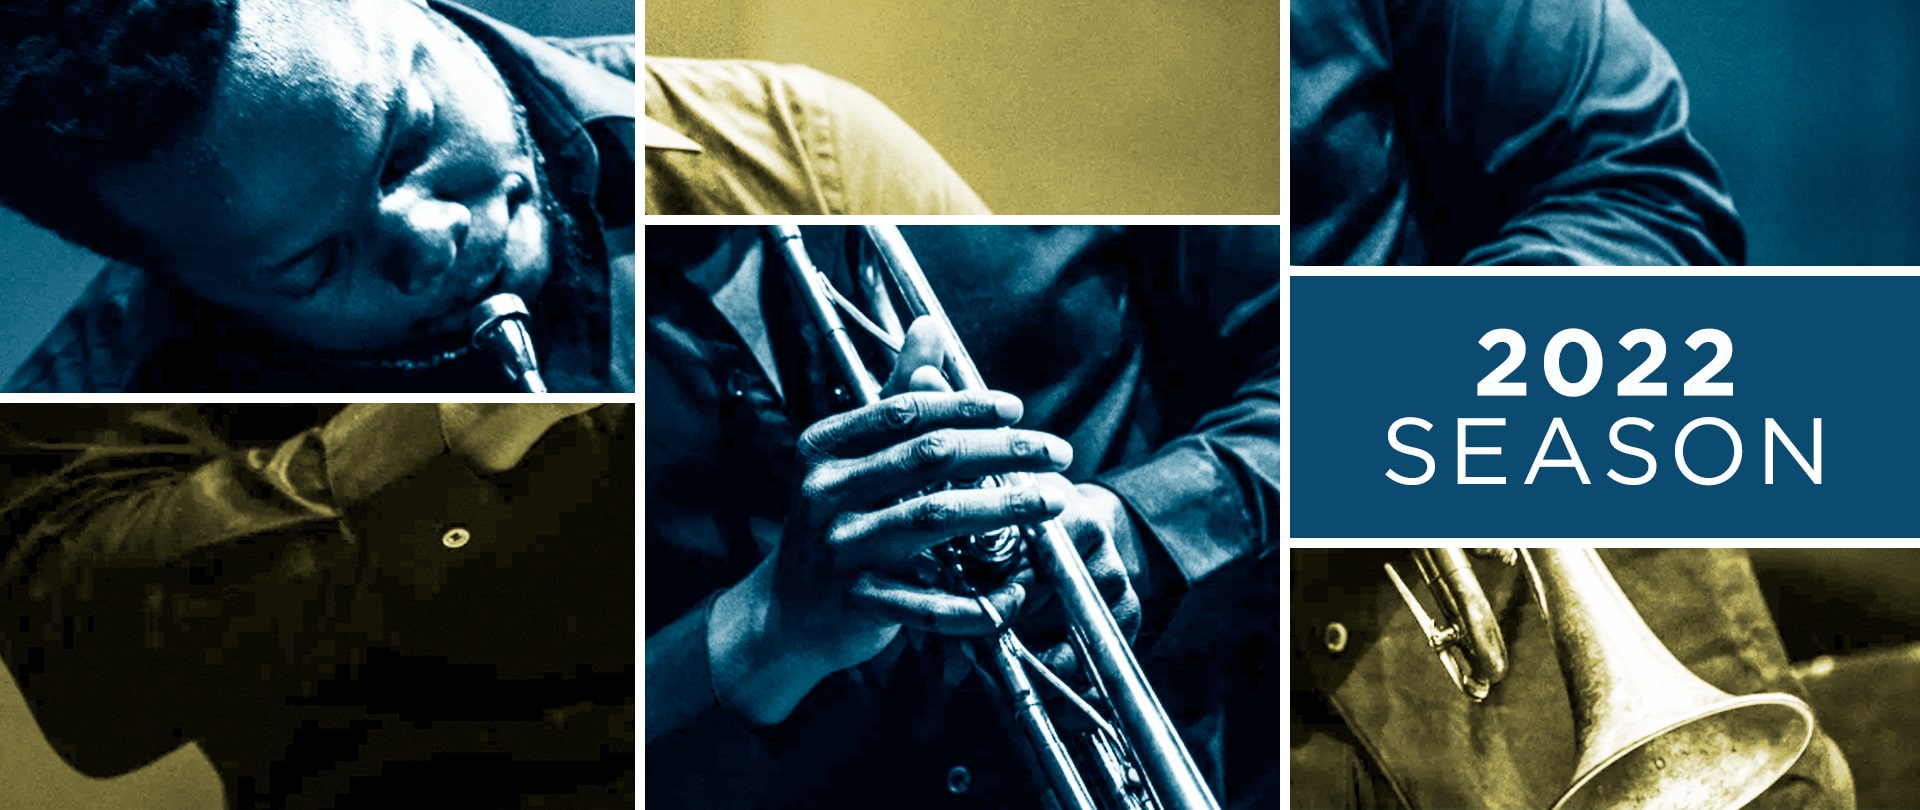 Live concerts are returning soon! A composite image of trumpeter Ambrose Akinmusire